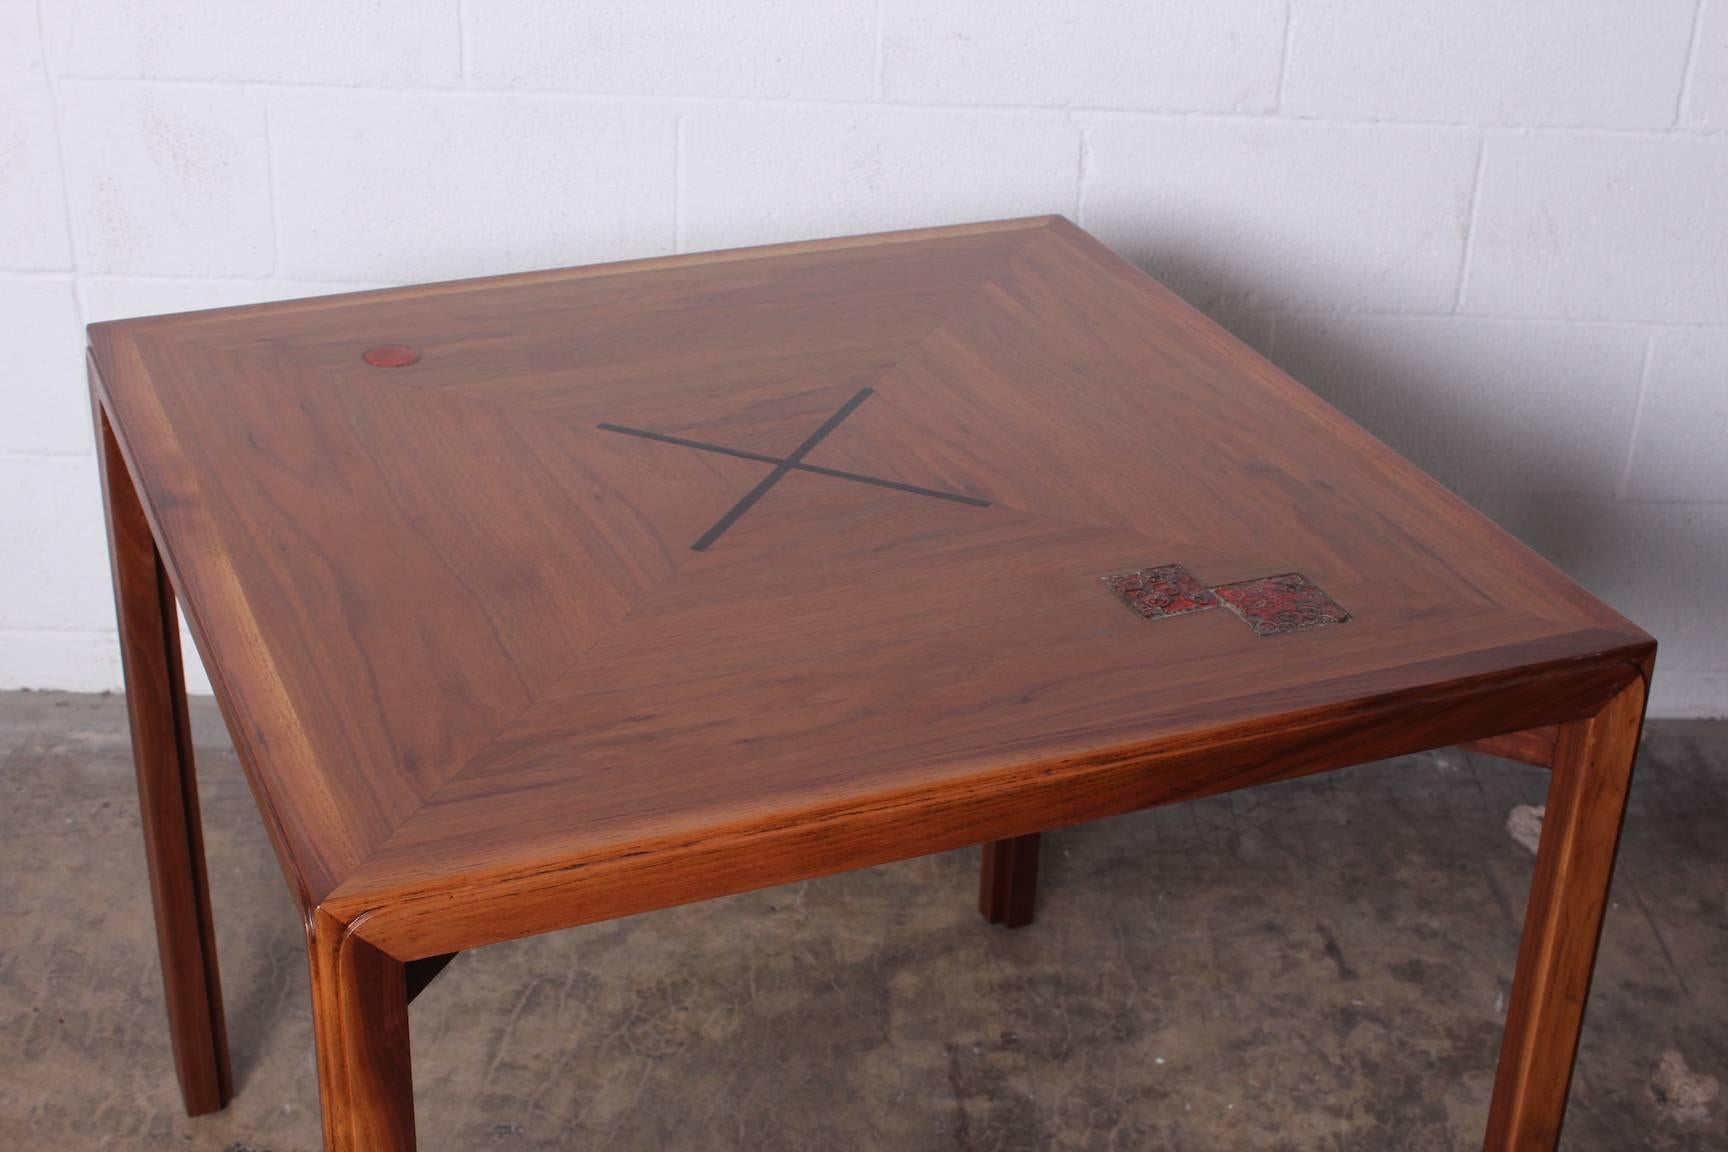 A rare walnut game table designed by Edward Wormley for Dunbar with ceramic tiles by Otto and Gertrude Natzler.